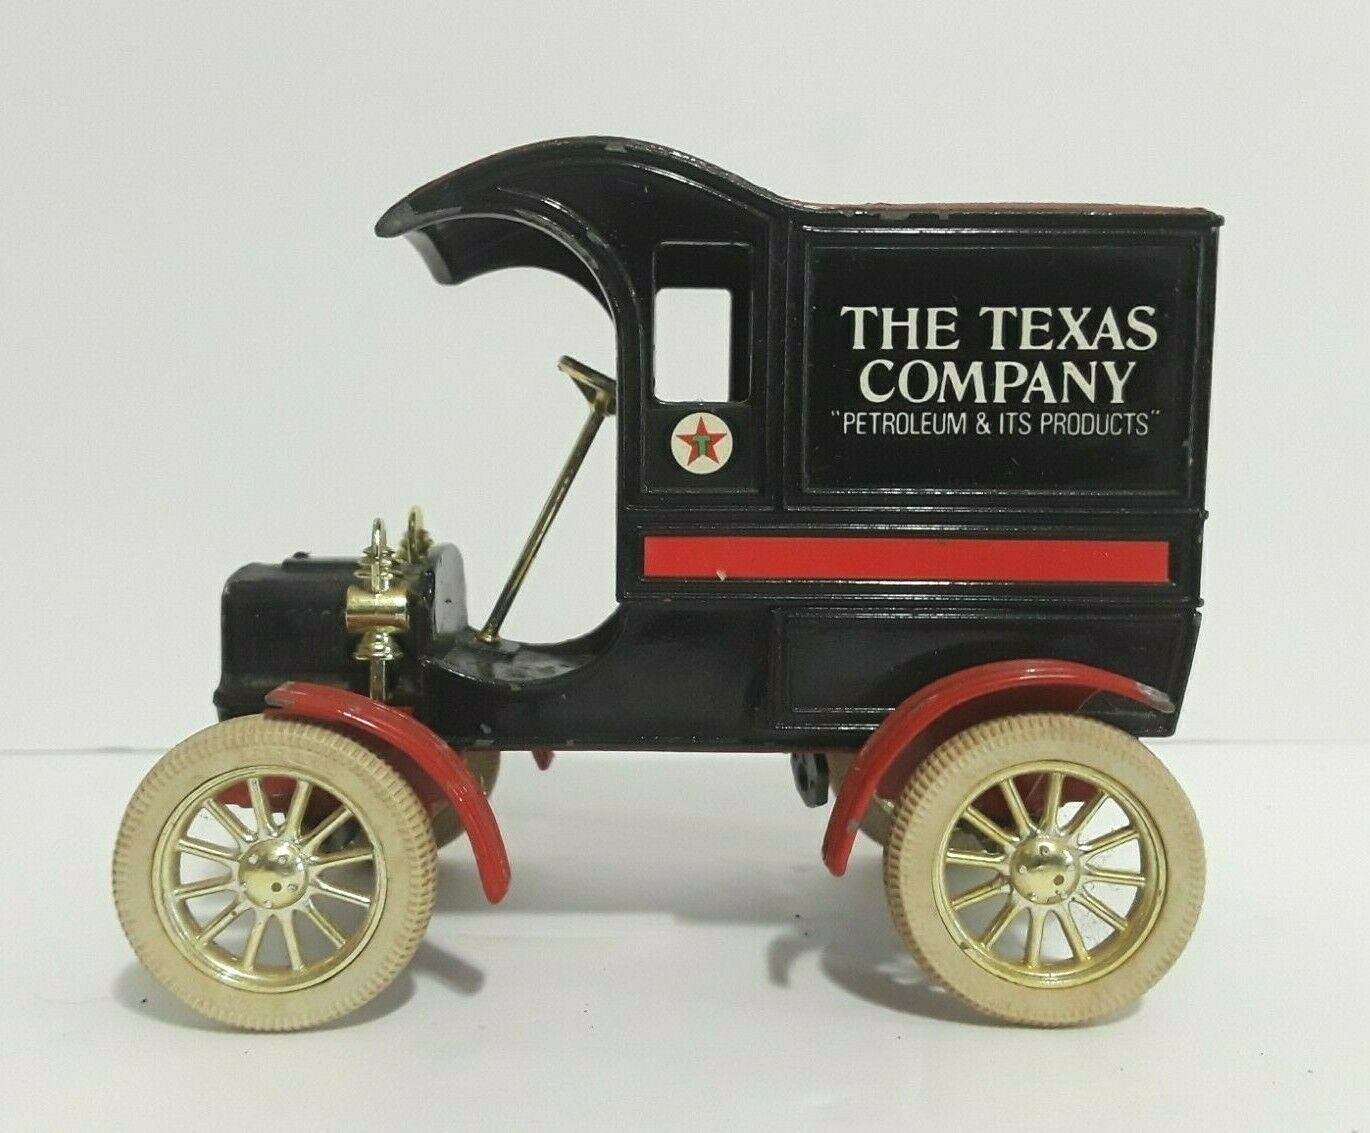 Primary image for Texaco The Texas Company Ertl Die Cast Bank